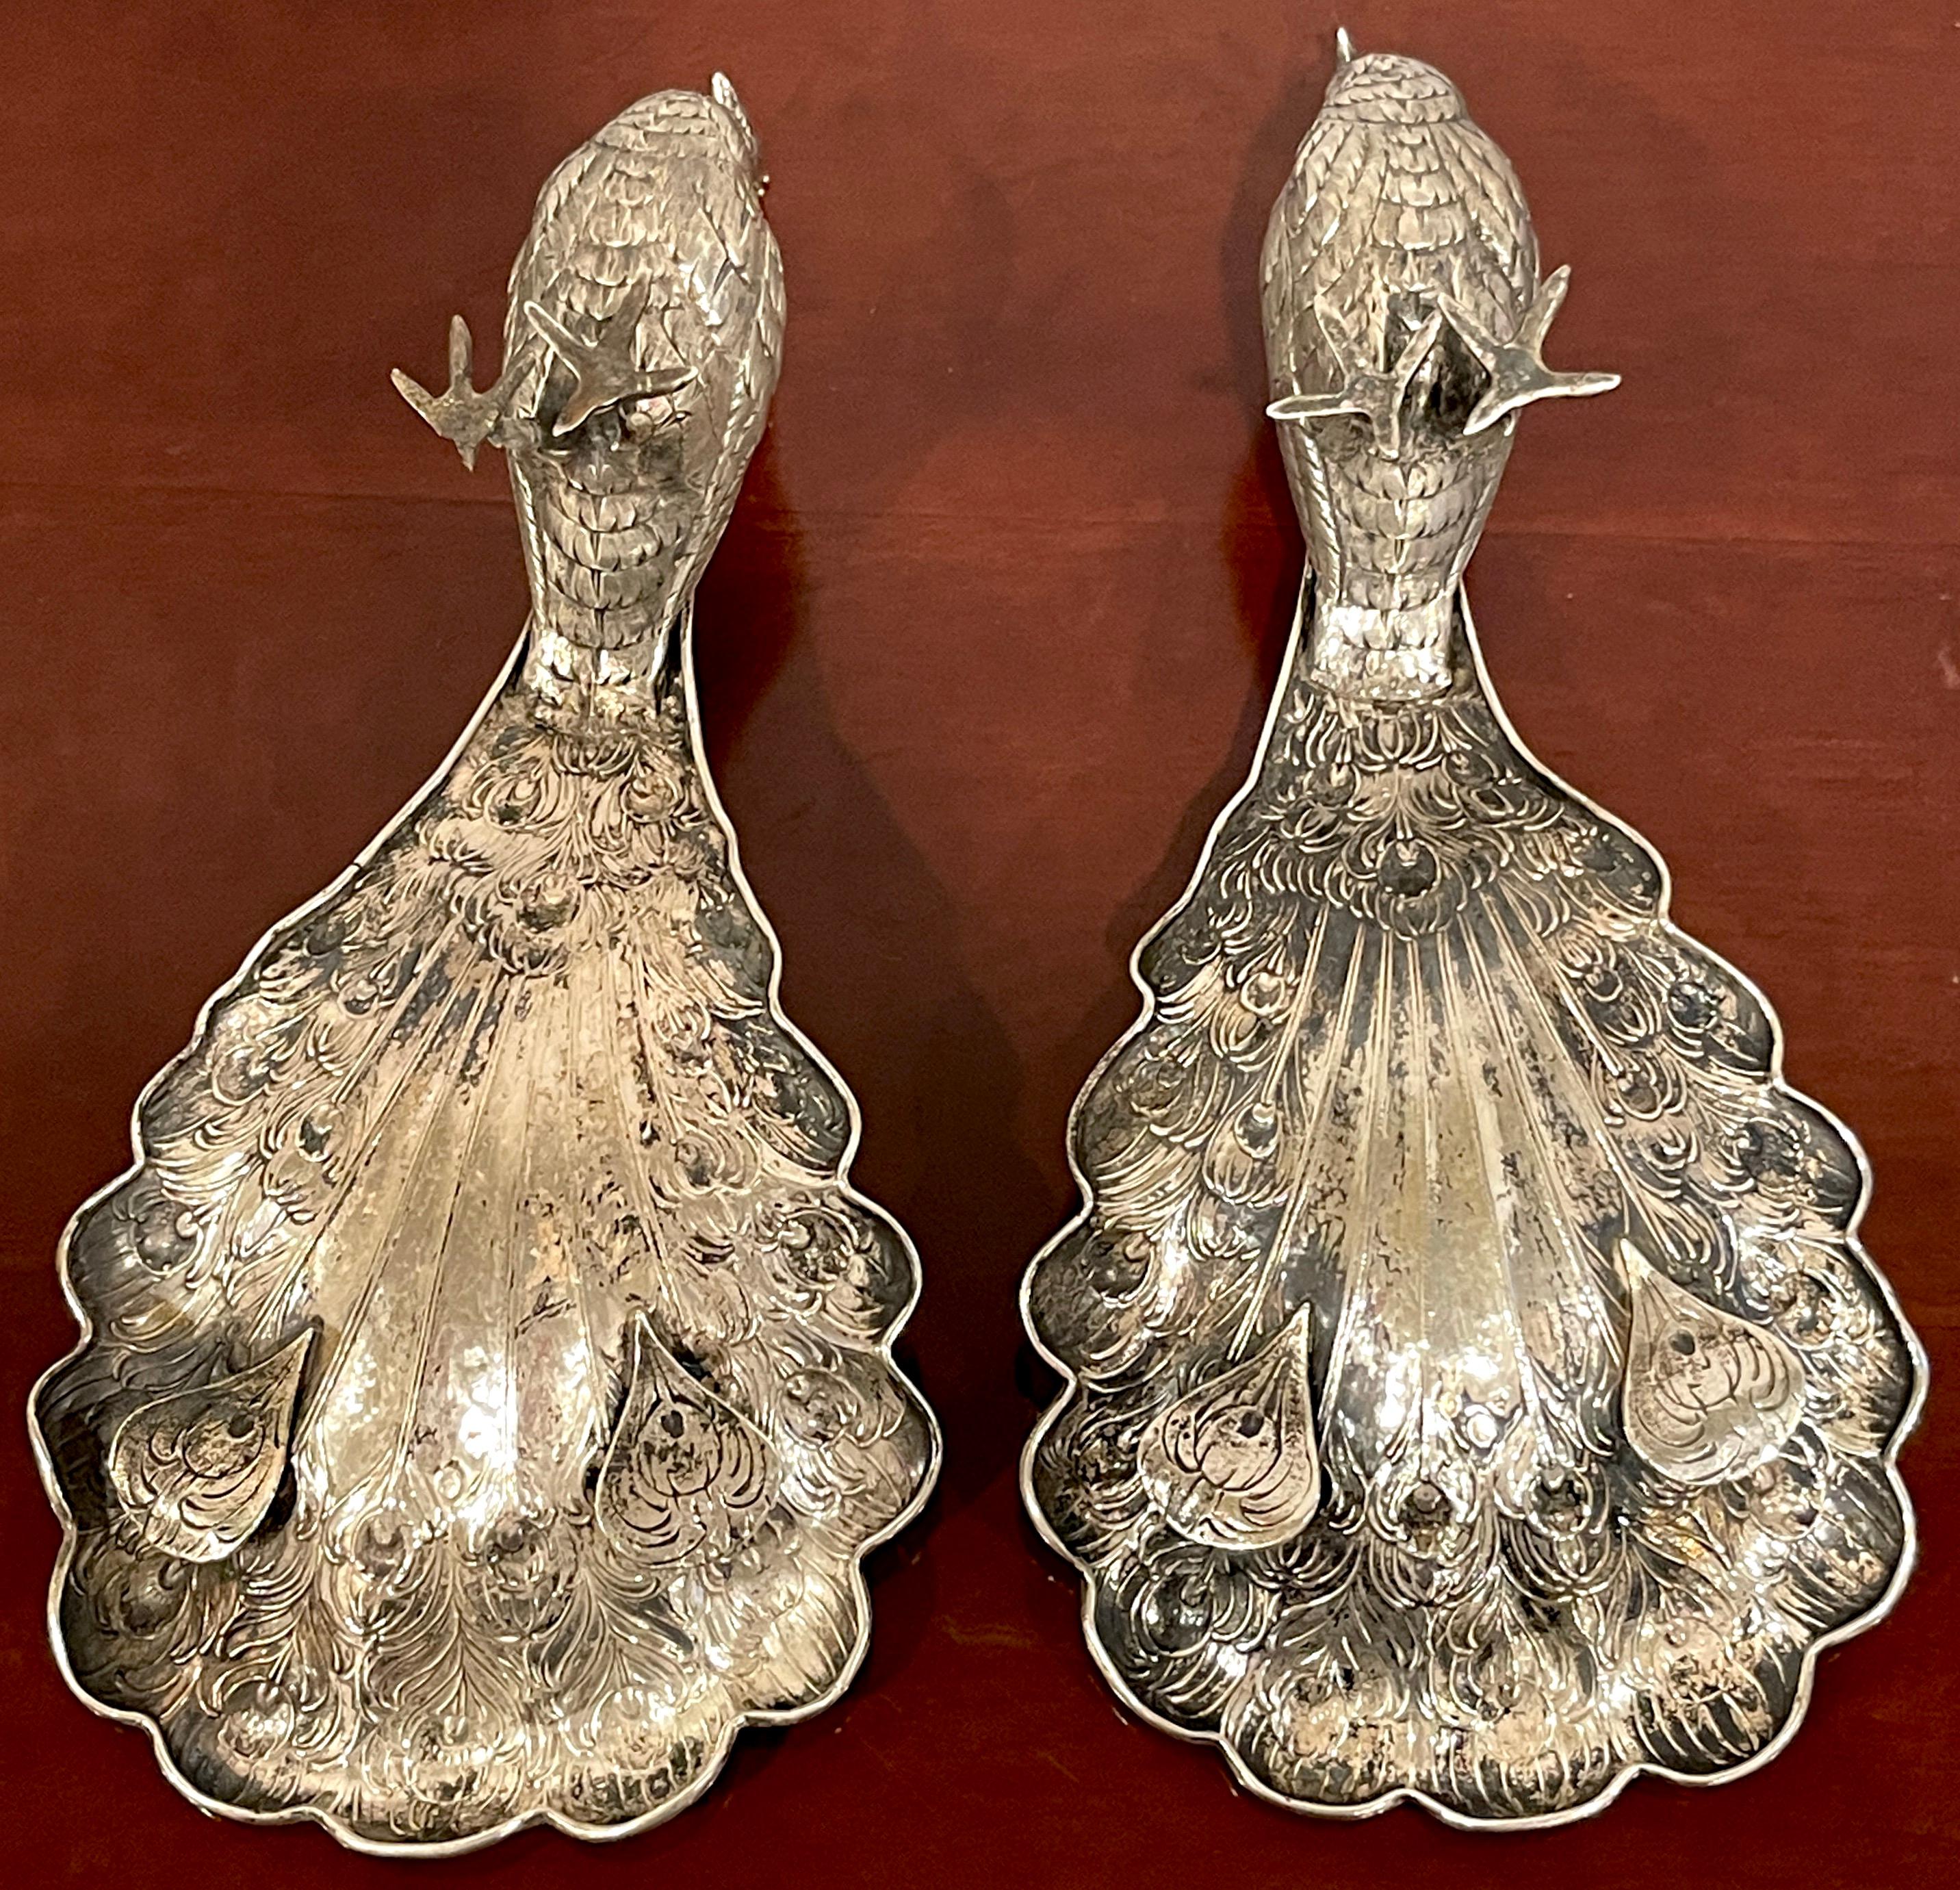 Pair of 19th Century Continental Silver Table Figures of Peacocks For Sale 4